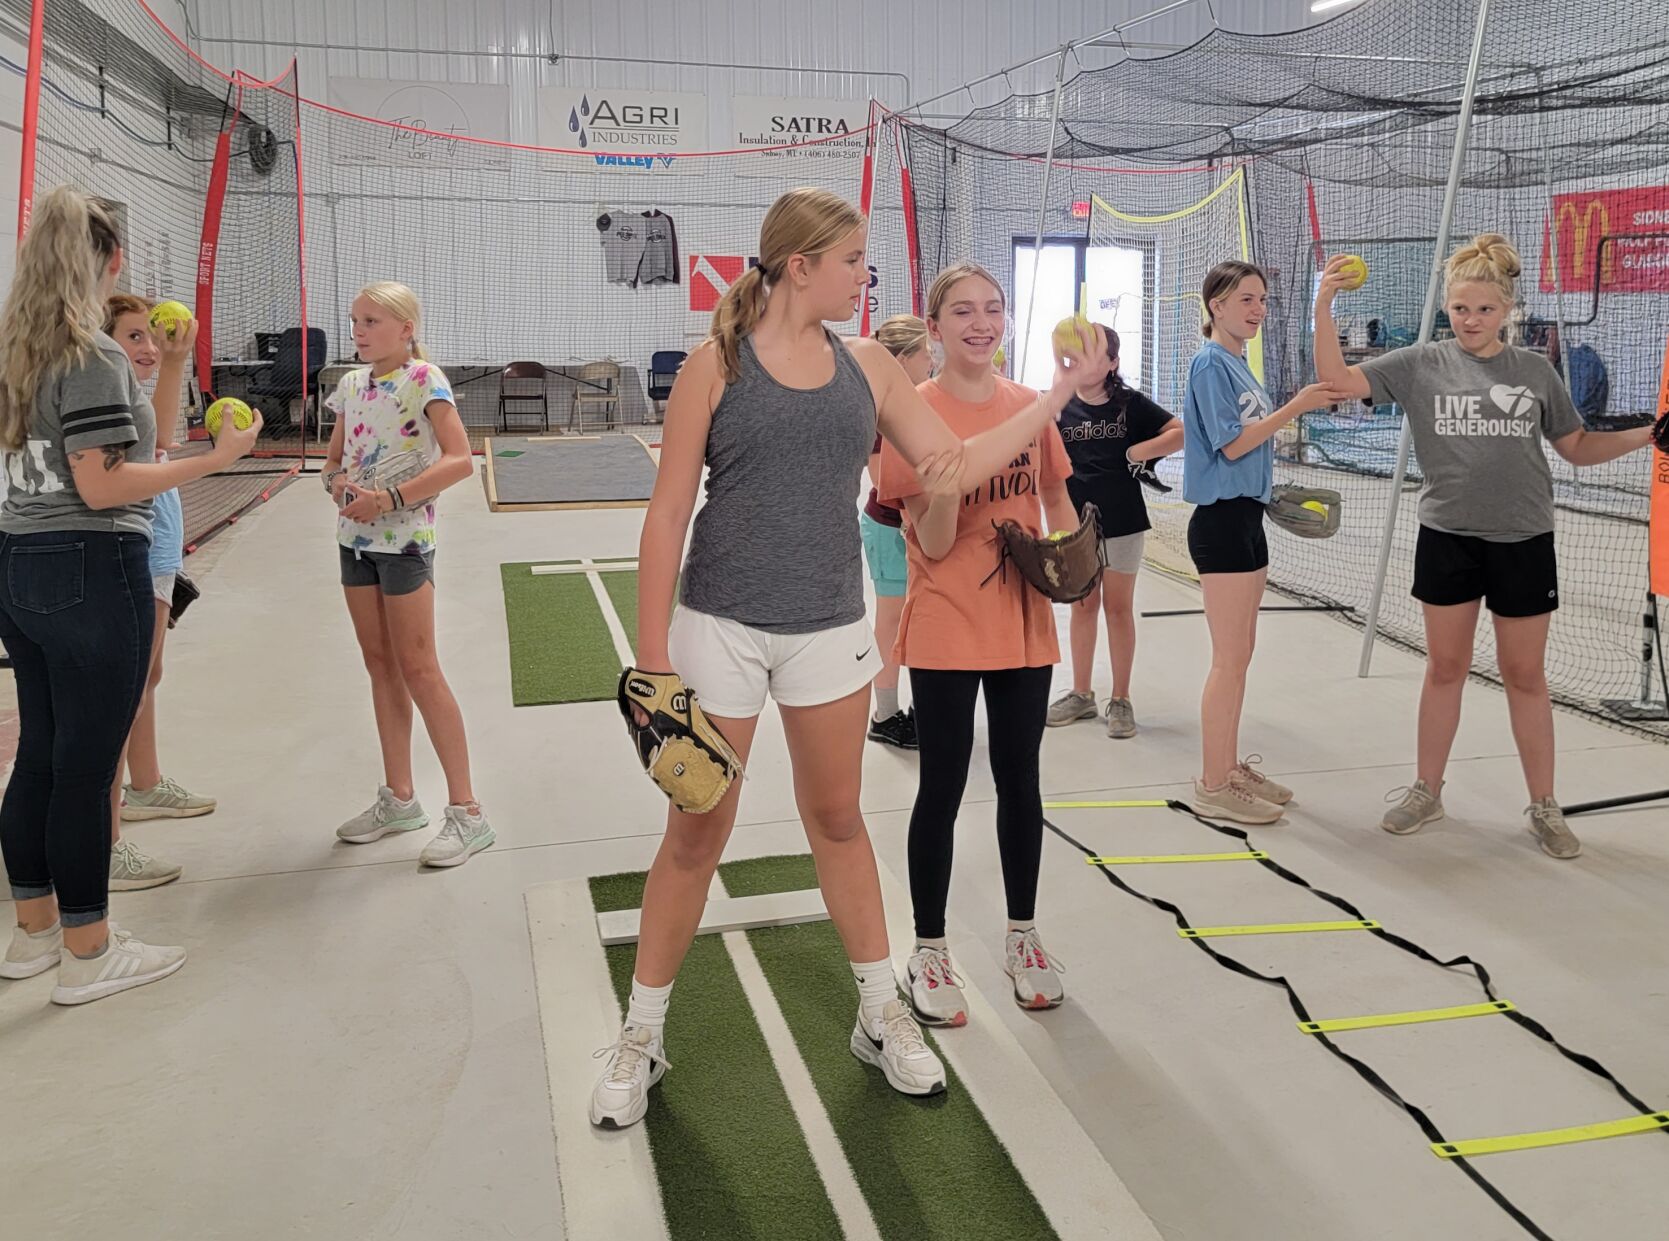 Sports Complex offering free hitting lessons in September Local News sidneyherald